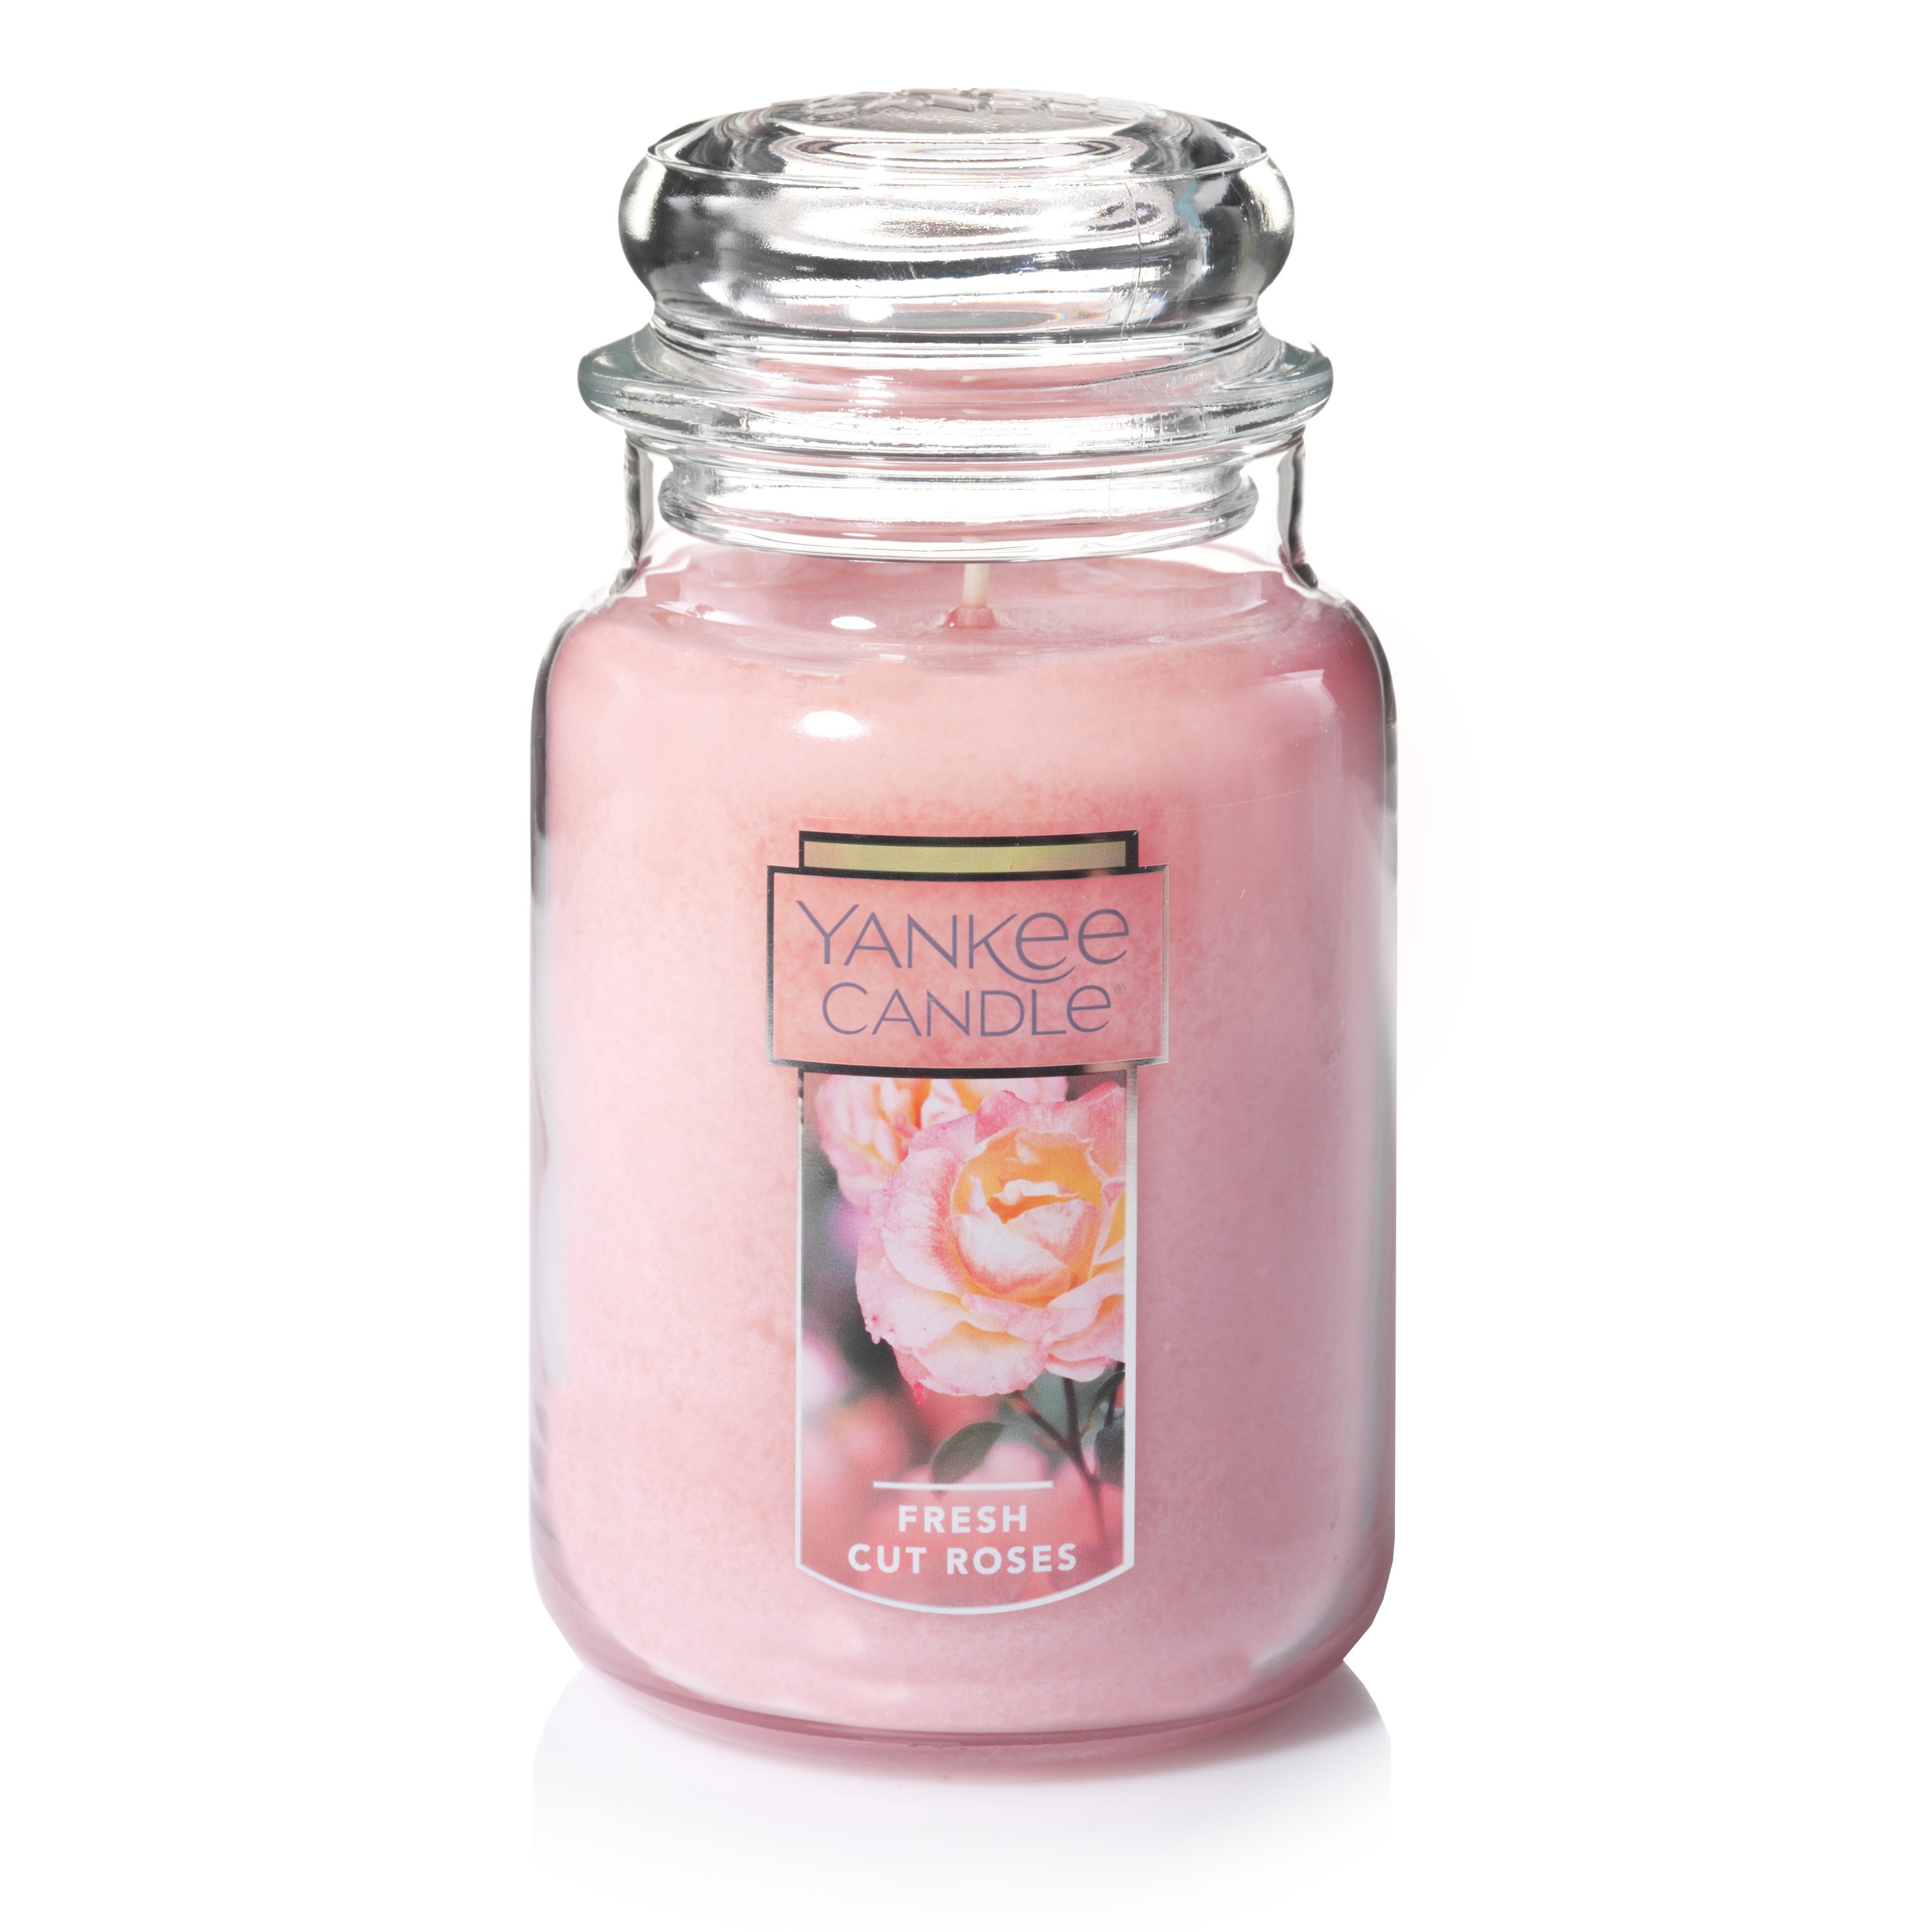 YankeeCandle.com  Candles, Yankee candle scents, Yankee candle